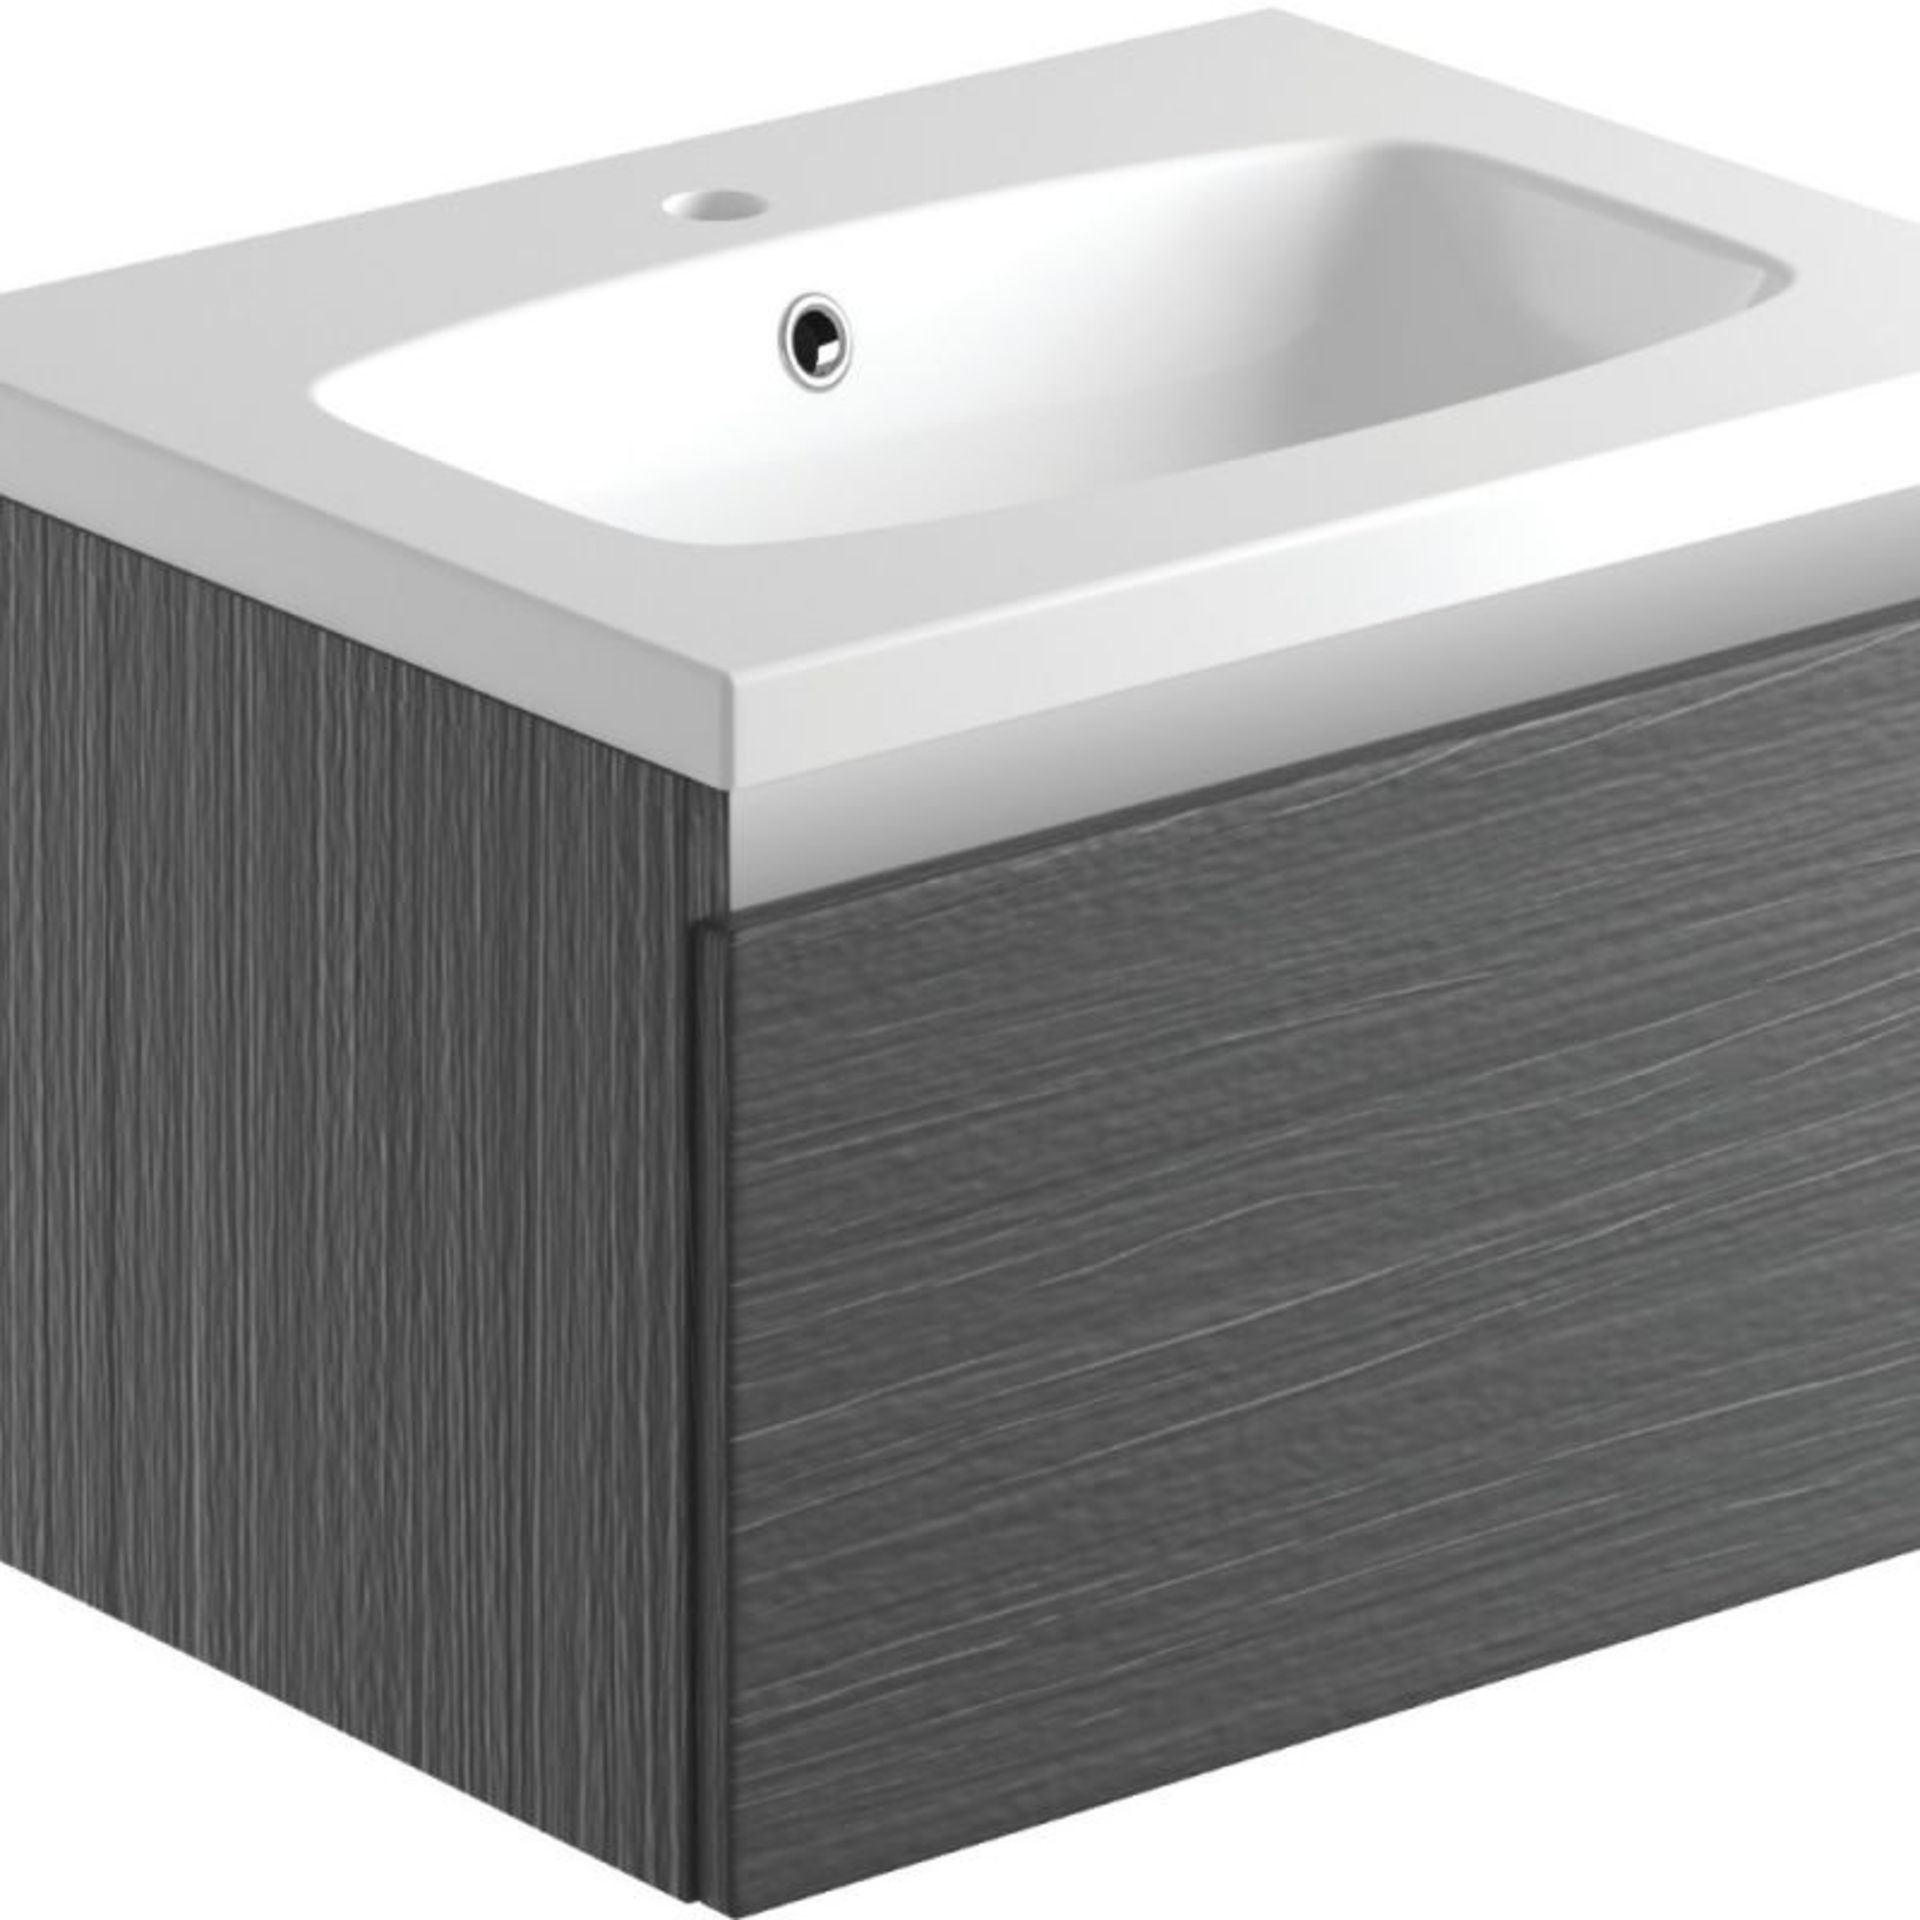 (AX104) New Carino 600mm 1 Drawer Wall Hung Unit & Basin - Graphitewood. RRP £229.00 The